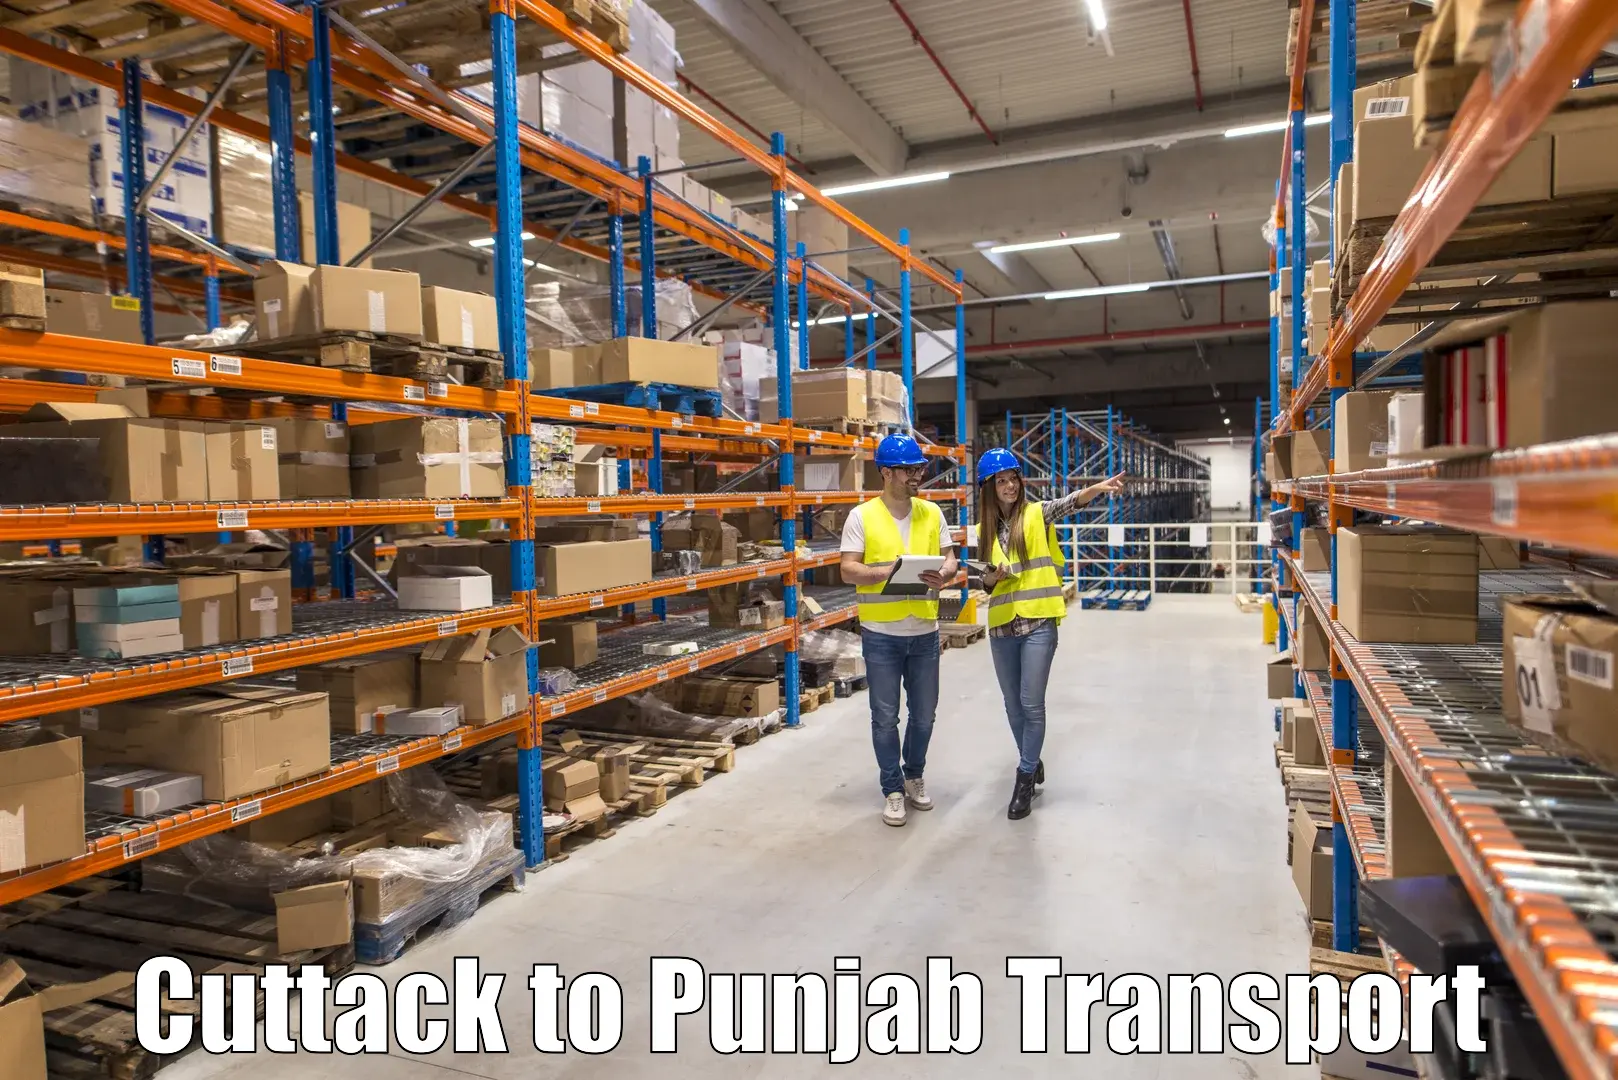 Inland transportation services Cuttack to Patiala